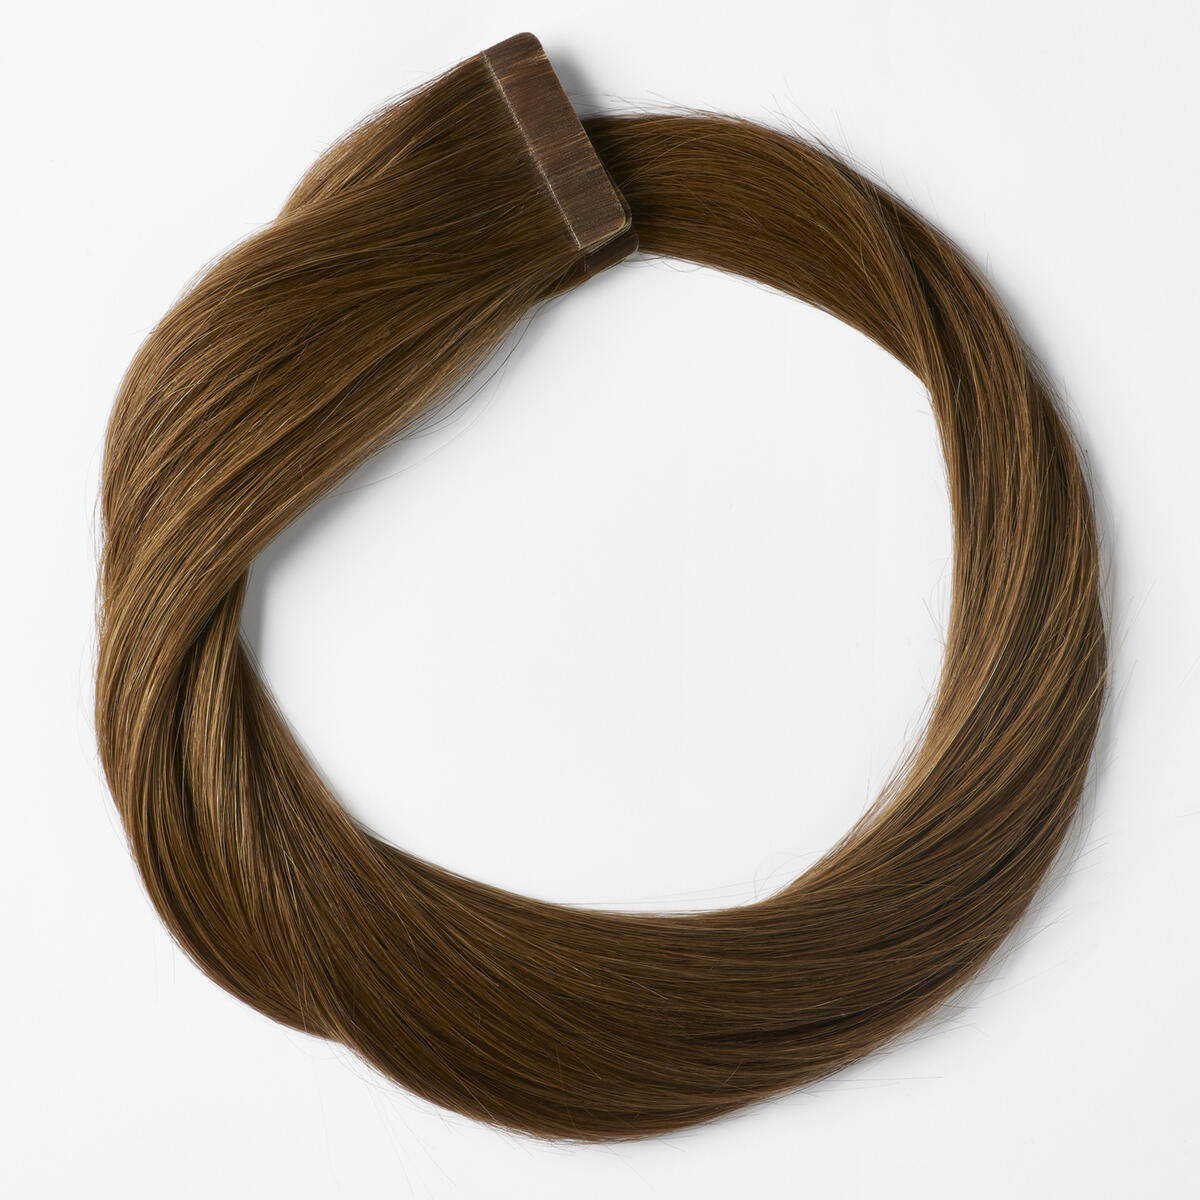 Basic Tape Extensions Classic 4 5.0 Brown 30 cm